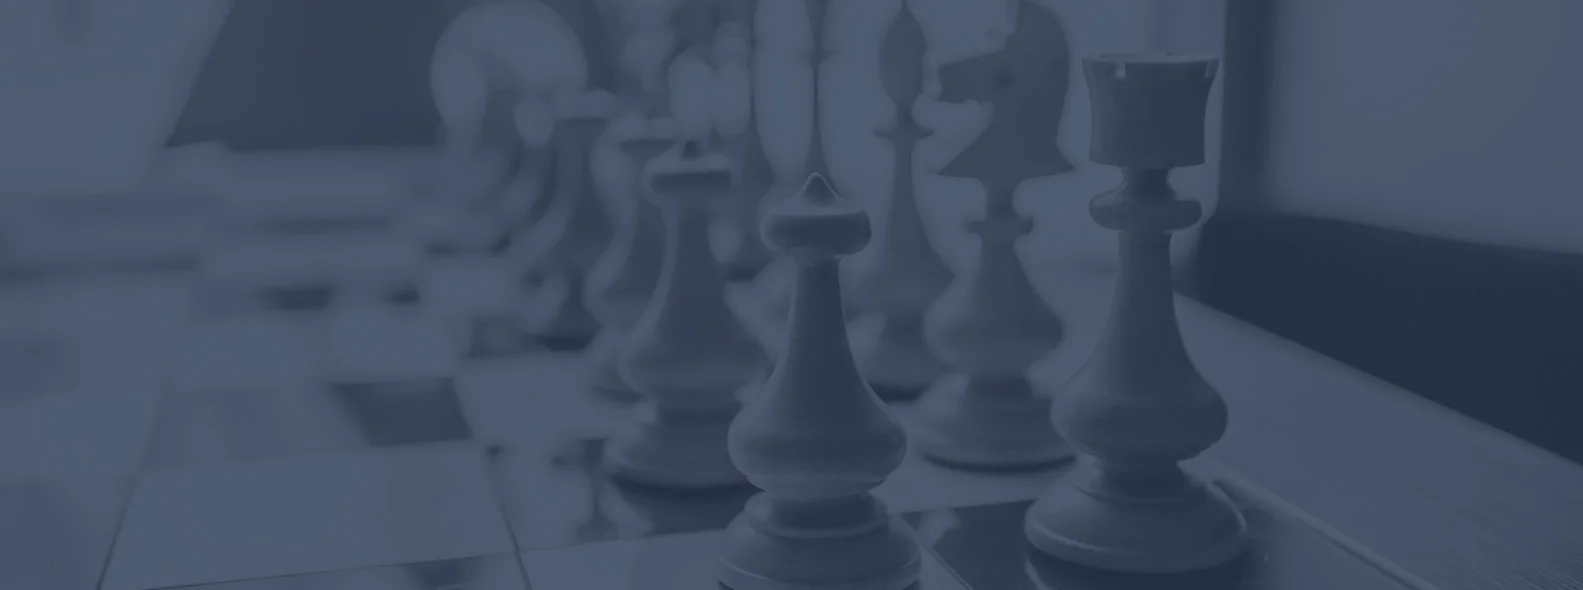 Chess pieces on a board representing containing costs for daily operations with due diligence services